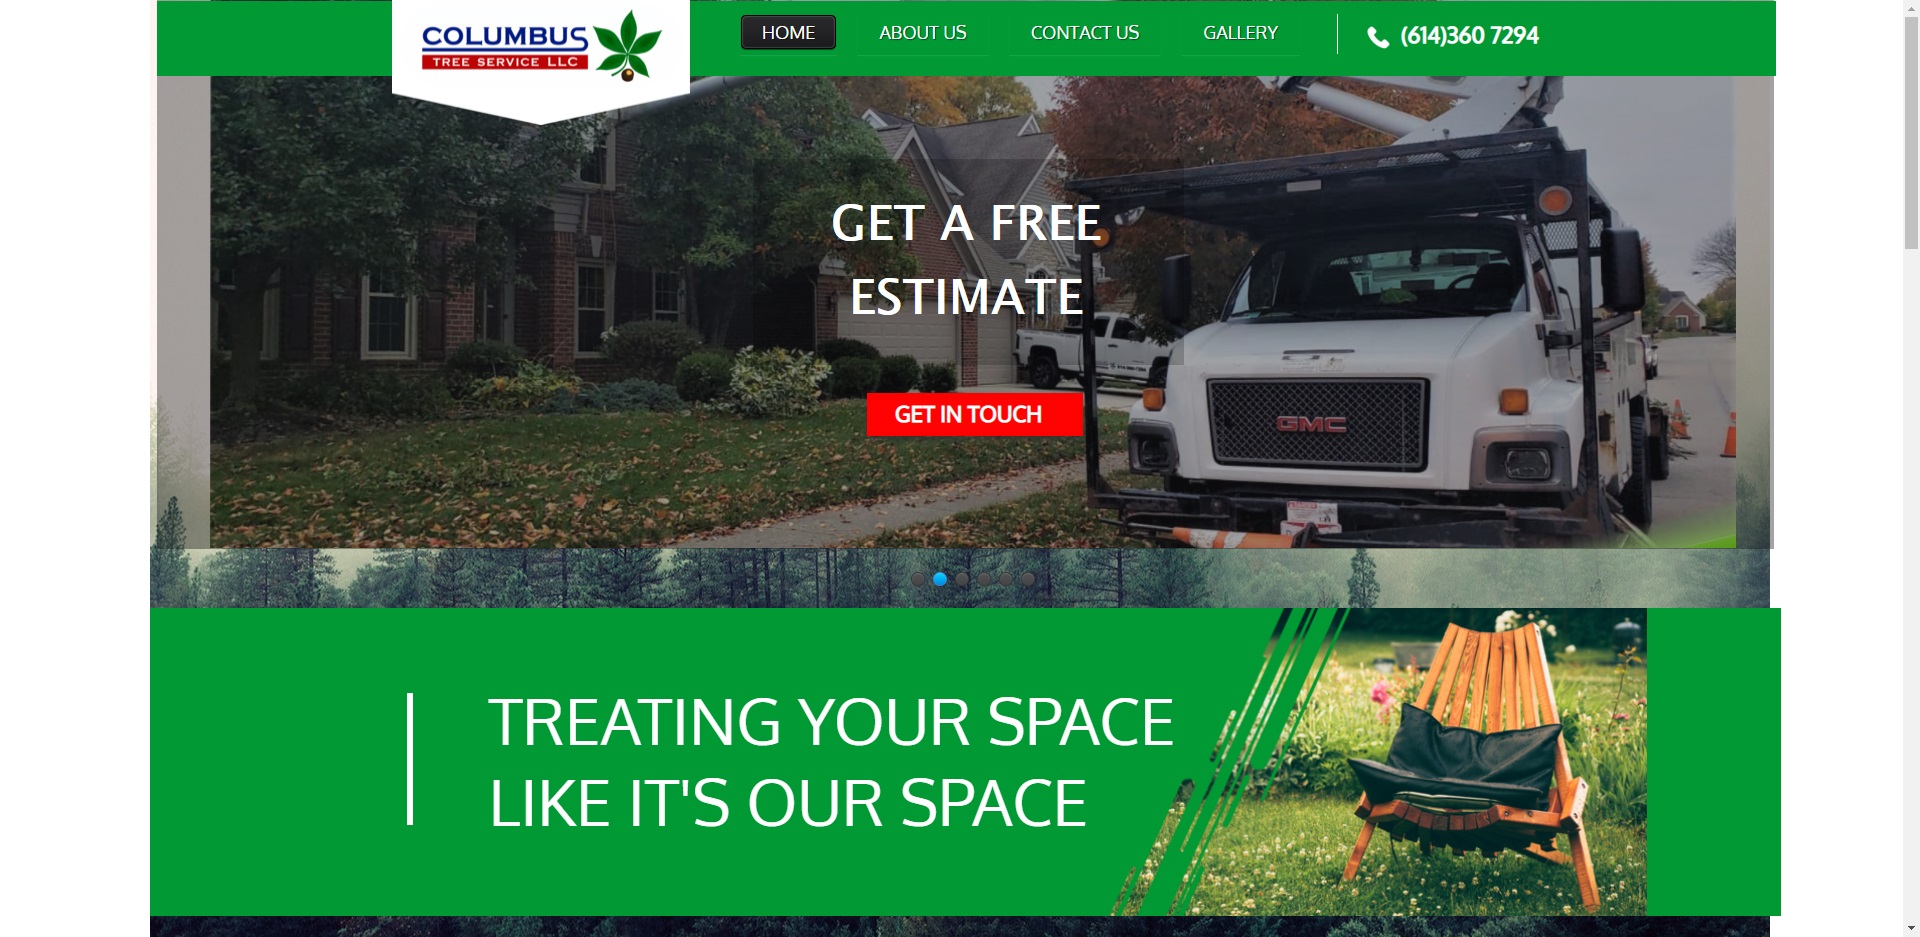 5 Best Tree Services in Columbus